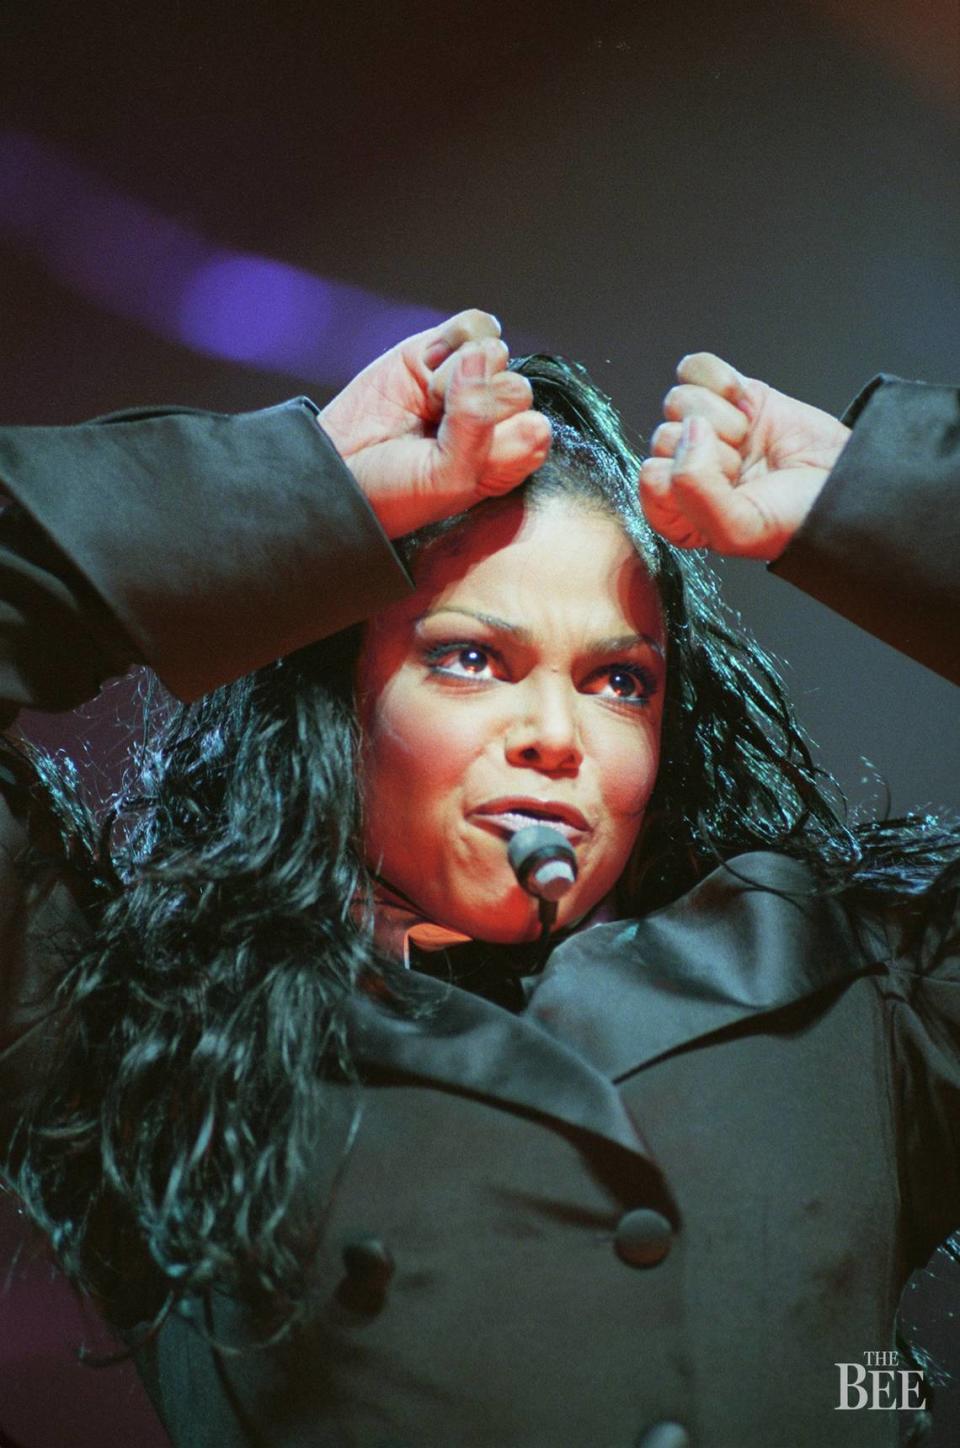 Janet Jackson performs at Arco Arena Friday night, Aug. 14, 1998. Live Nation Concert Week offers $25 tickets to over 5,000 shows. Peso Pluma, Janet Jackson, Bryson Tiller, Maxwell will stop in Sacramento.